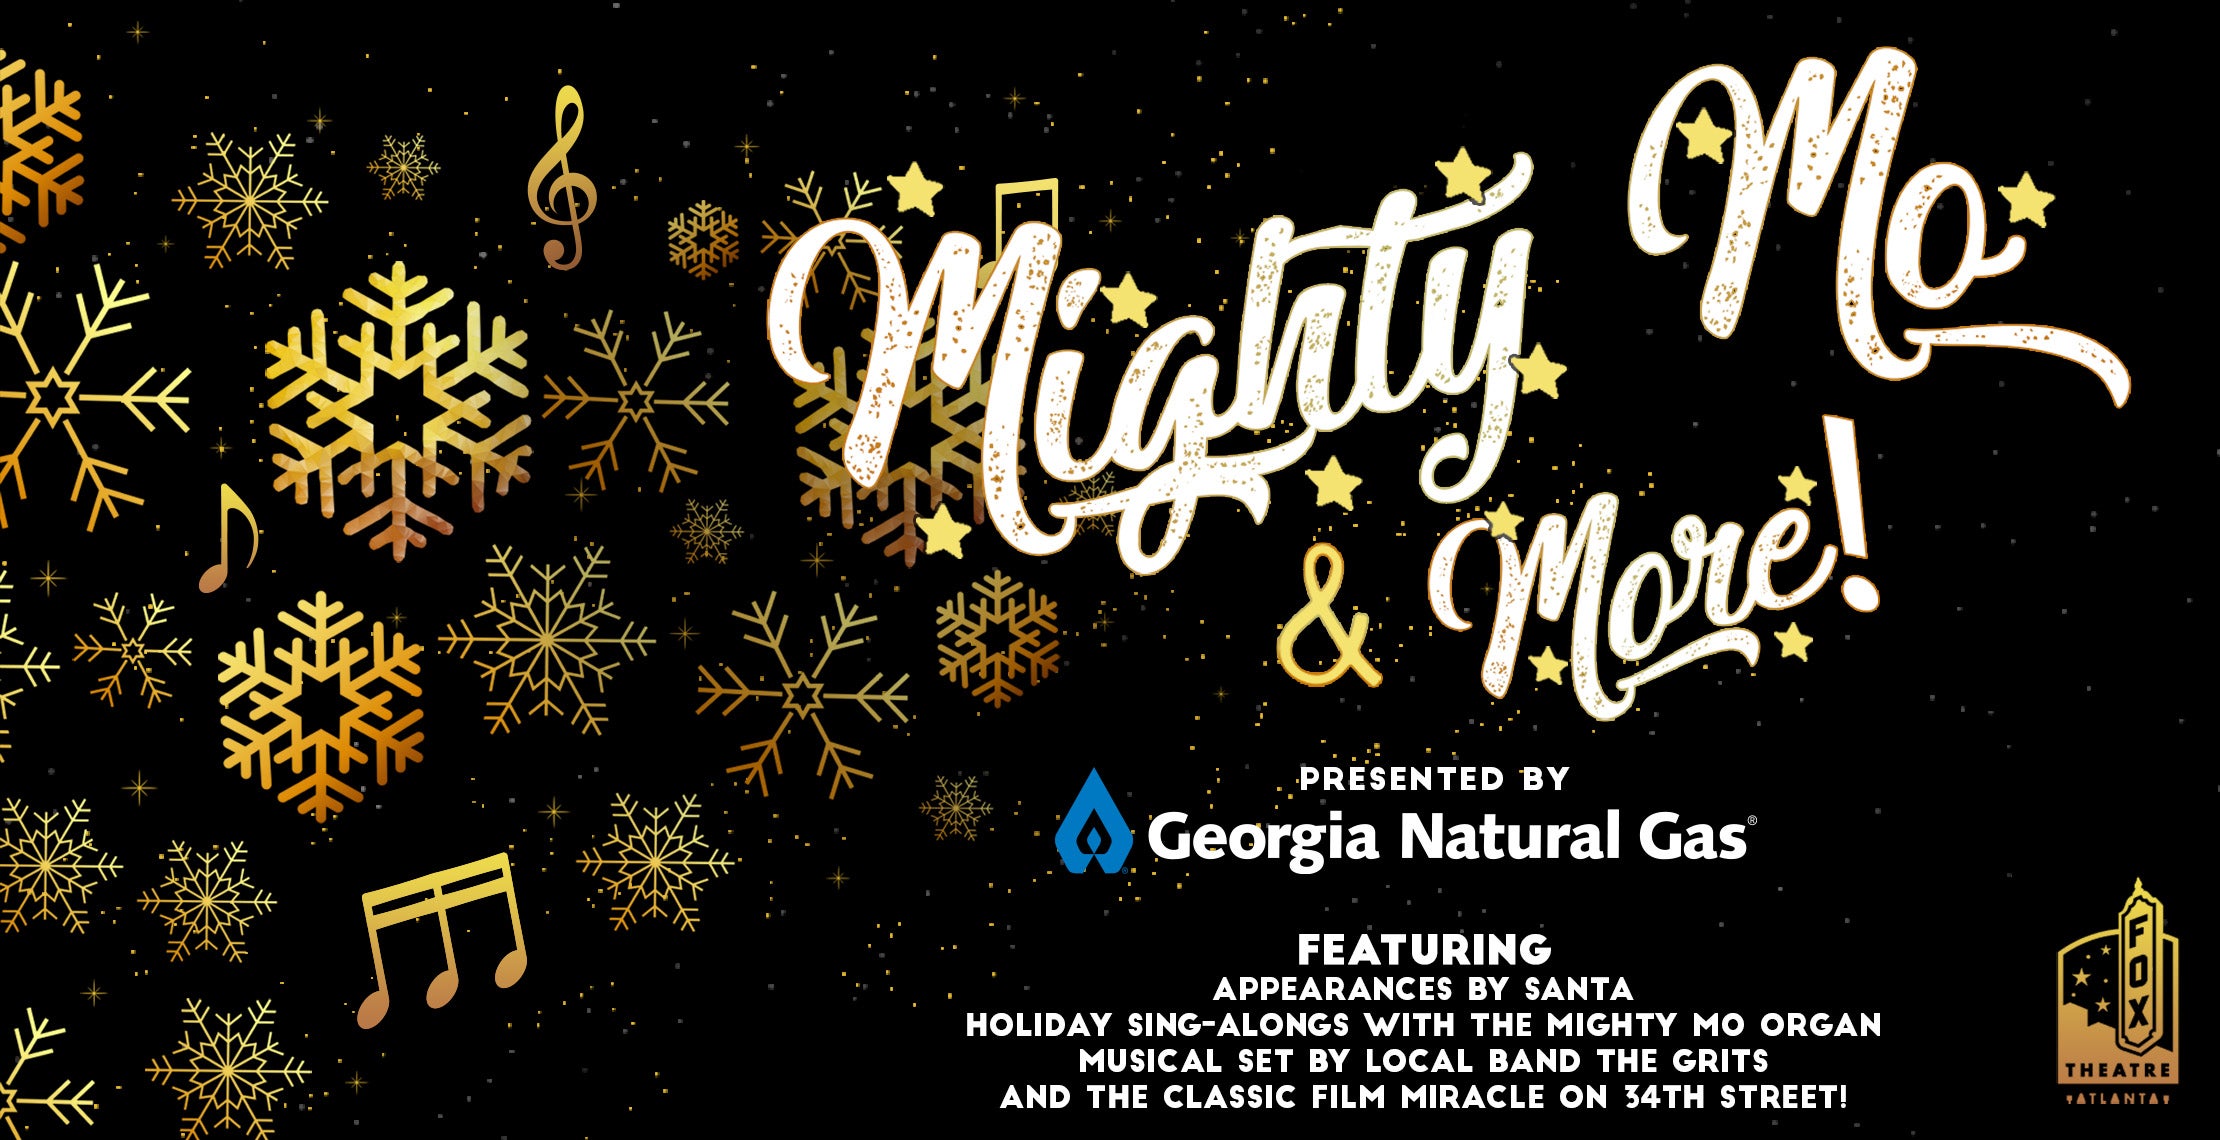 Mighty Mo & More! presented by Georgia Natural Gas